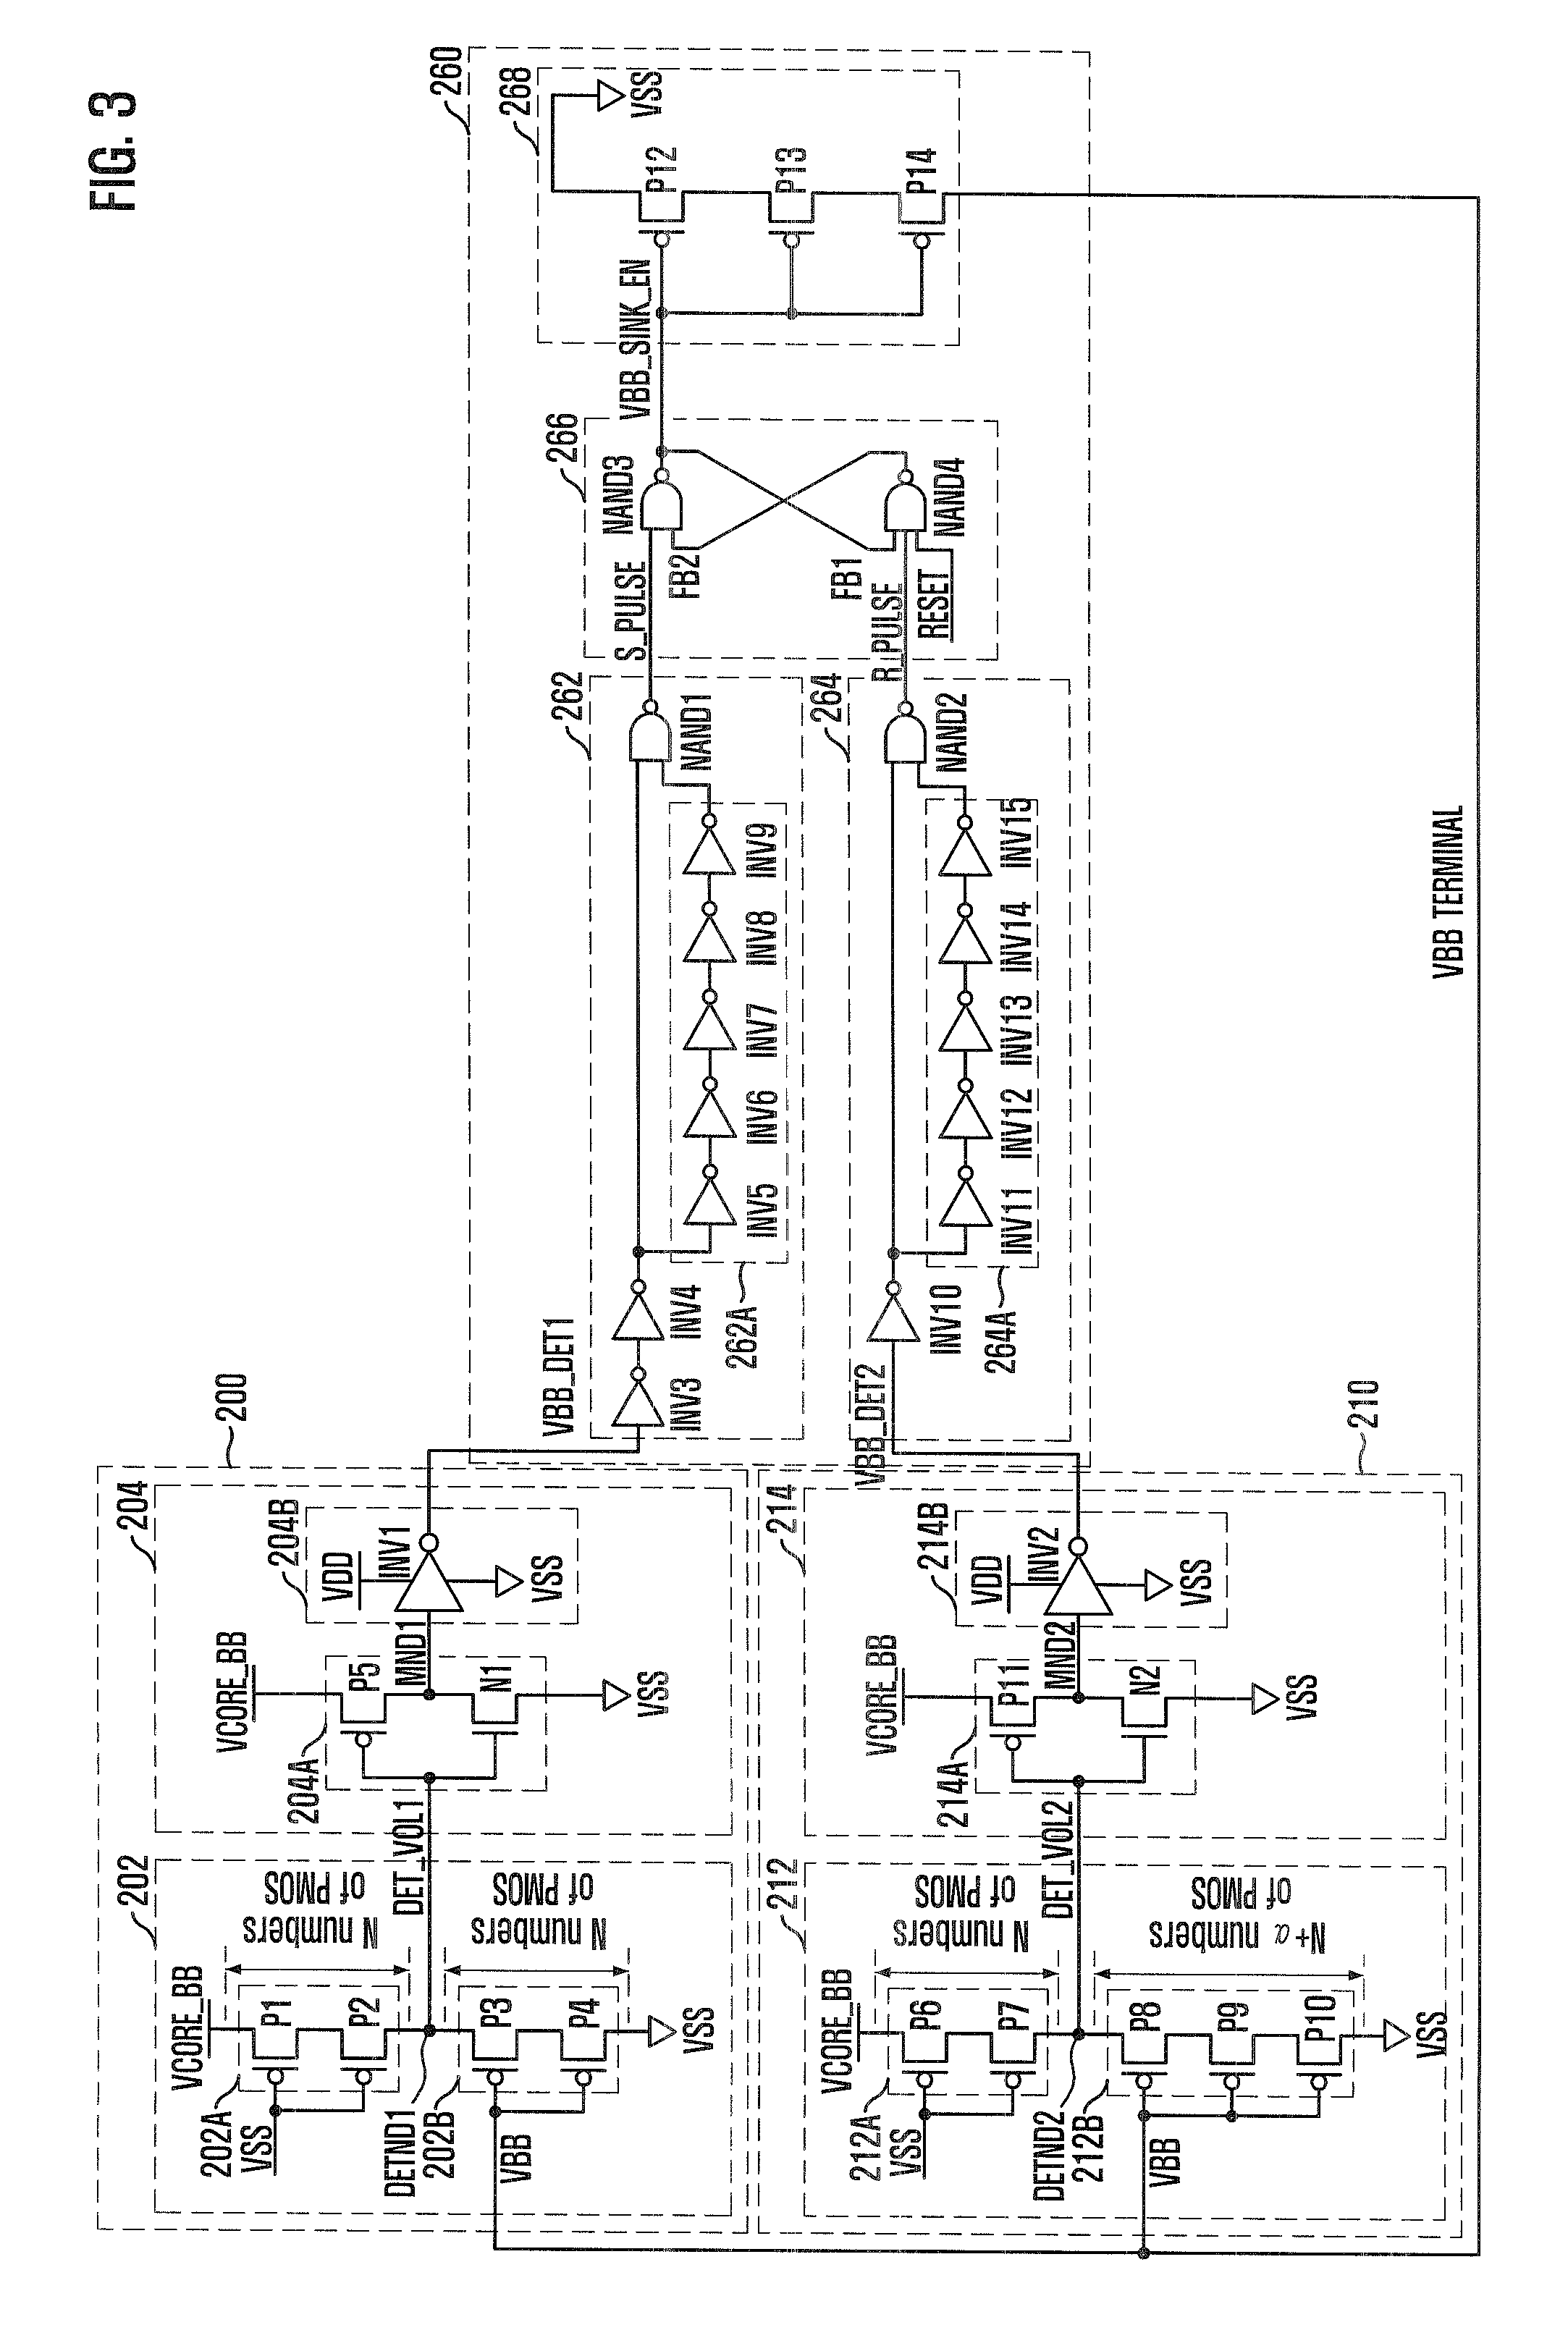 Semiconductor memory device having back-bias voltage in stable range